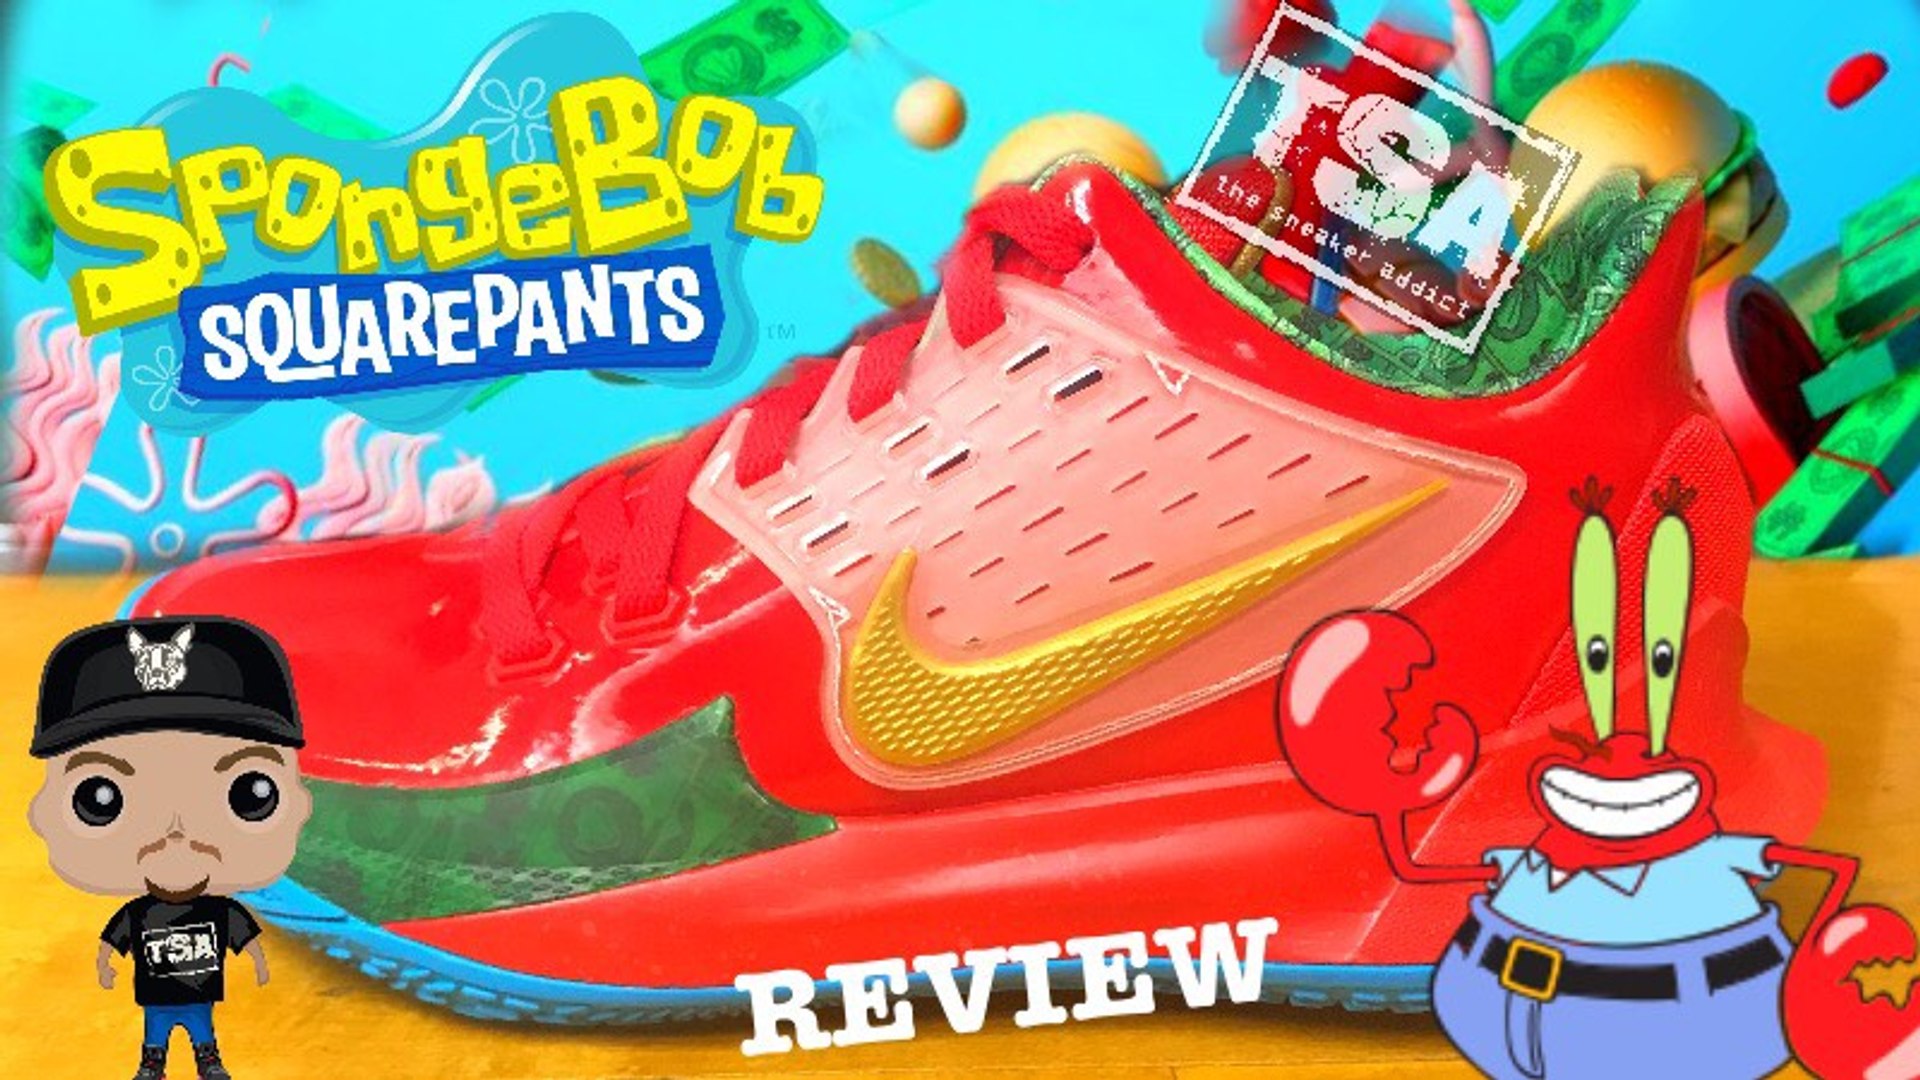 kyrie 5 review